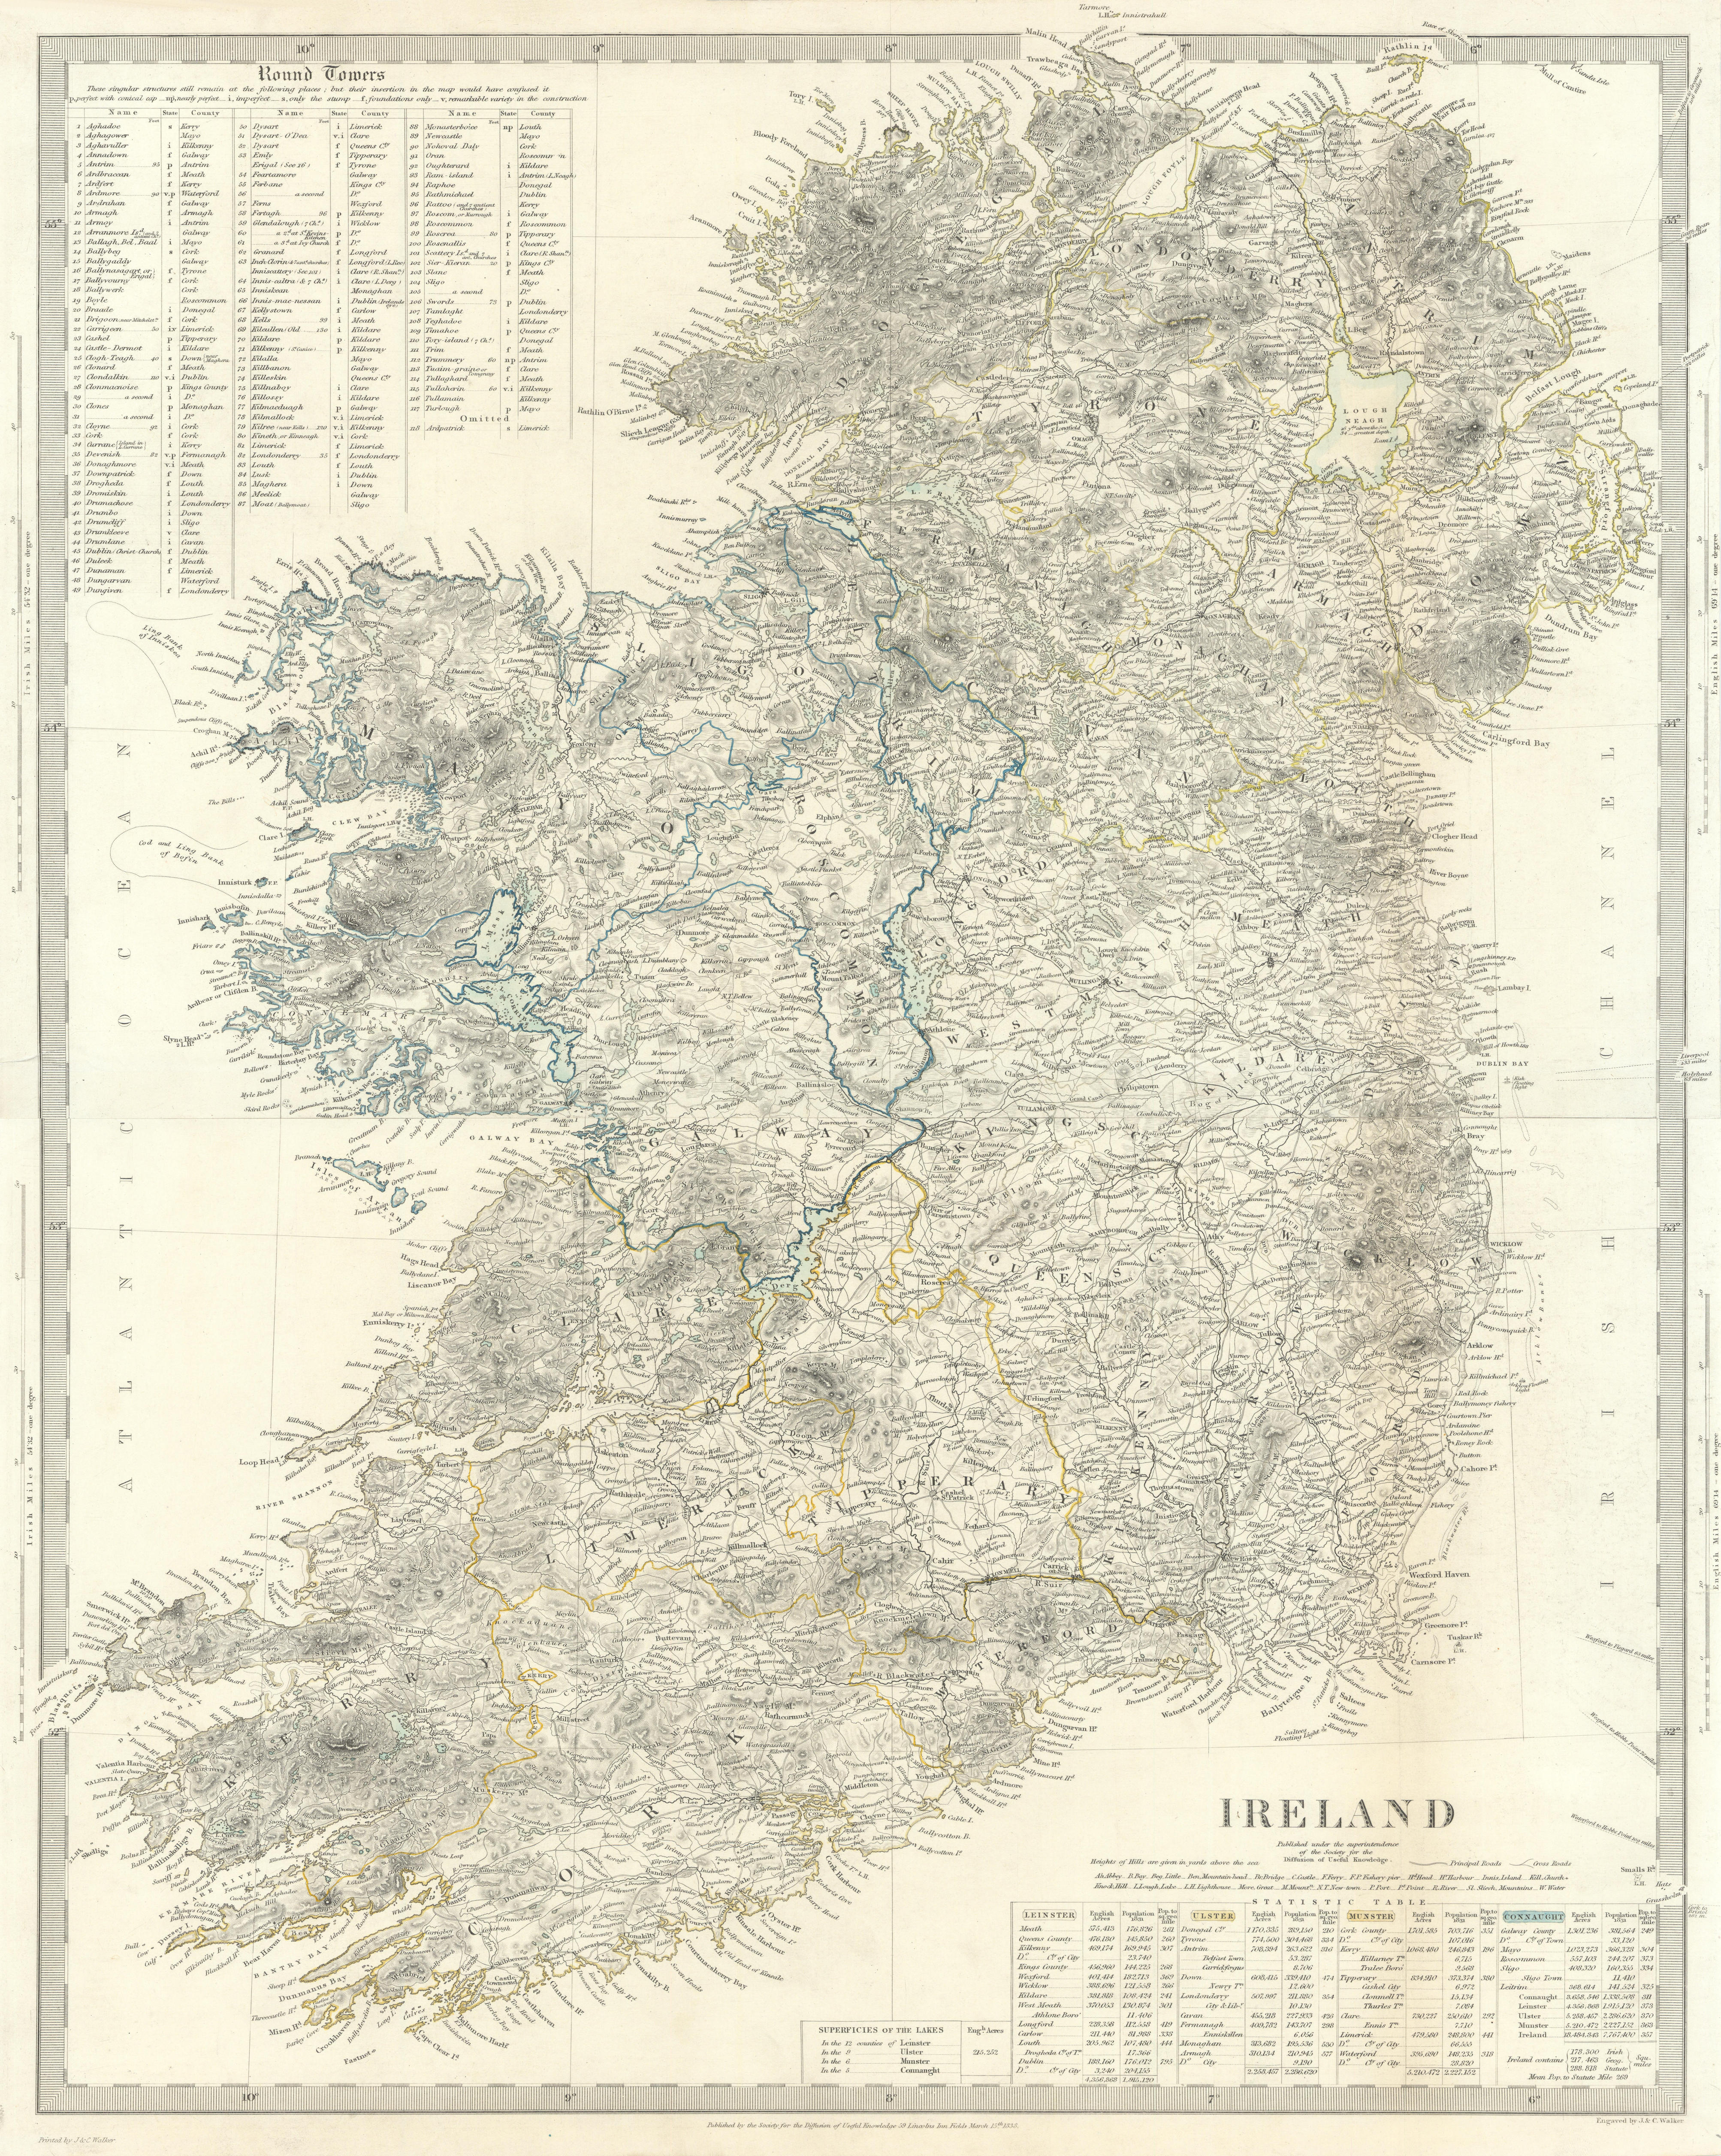 Associate Product IRELAND on 2 sheets conjoined 62x50 cm. Round towers Cloigthithe. SDUK 1844 map